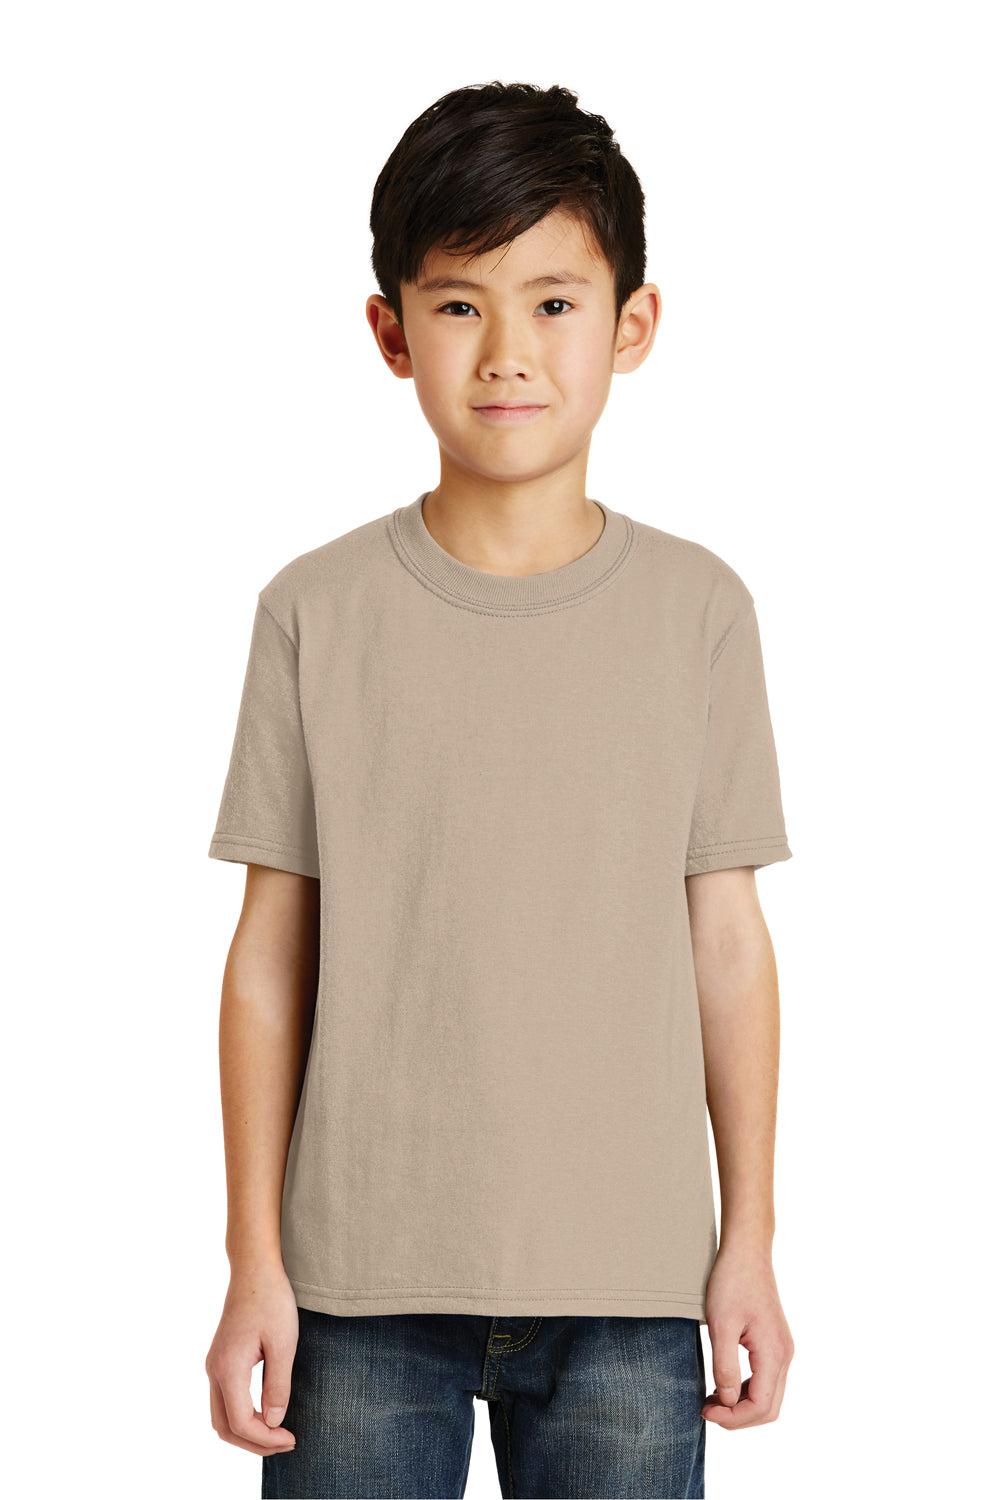 Port & Company PC55Y Youth Core Short Sleeve Crewneck T-Shirt Sand Brown Front